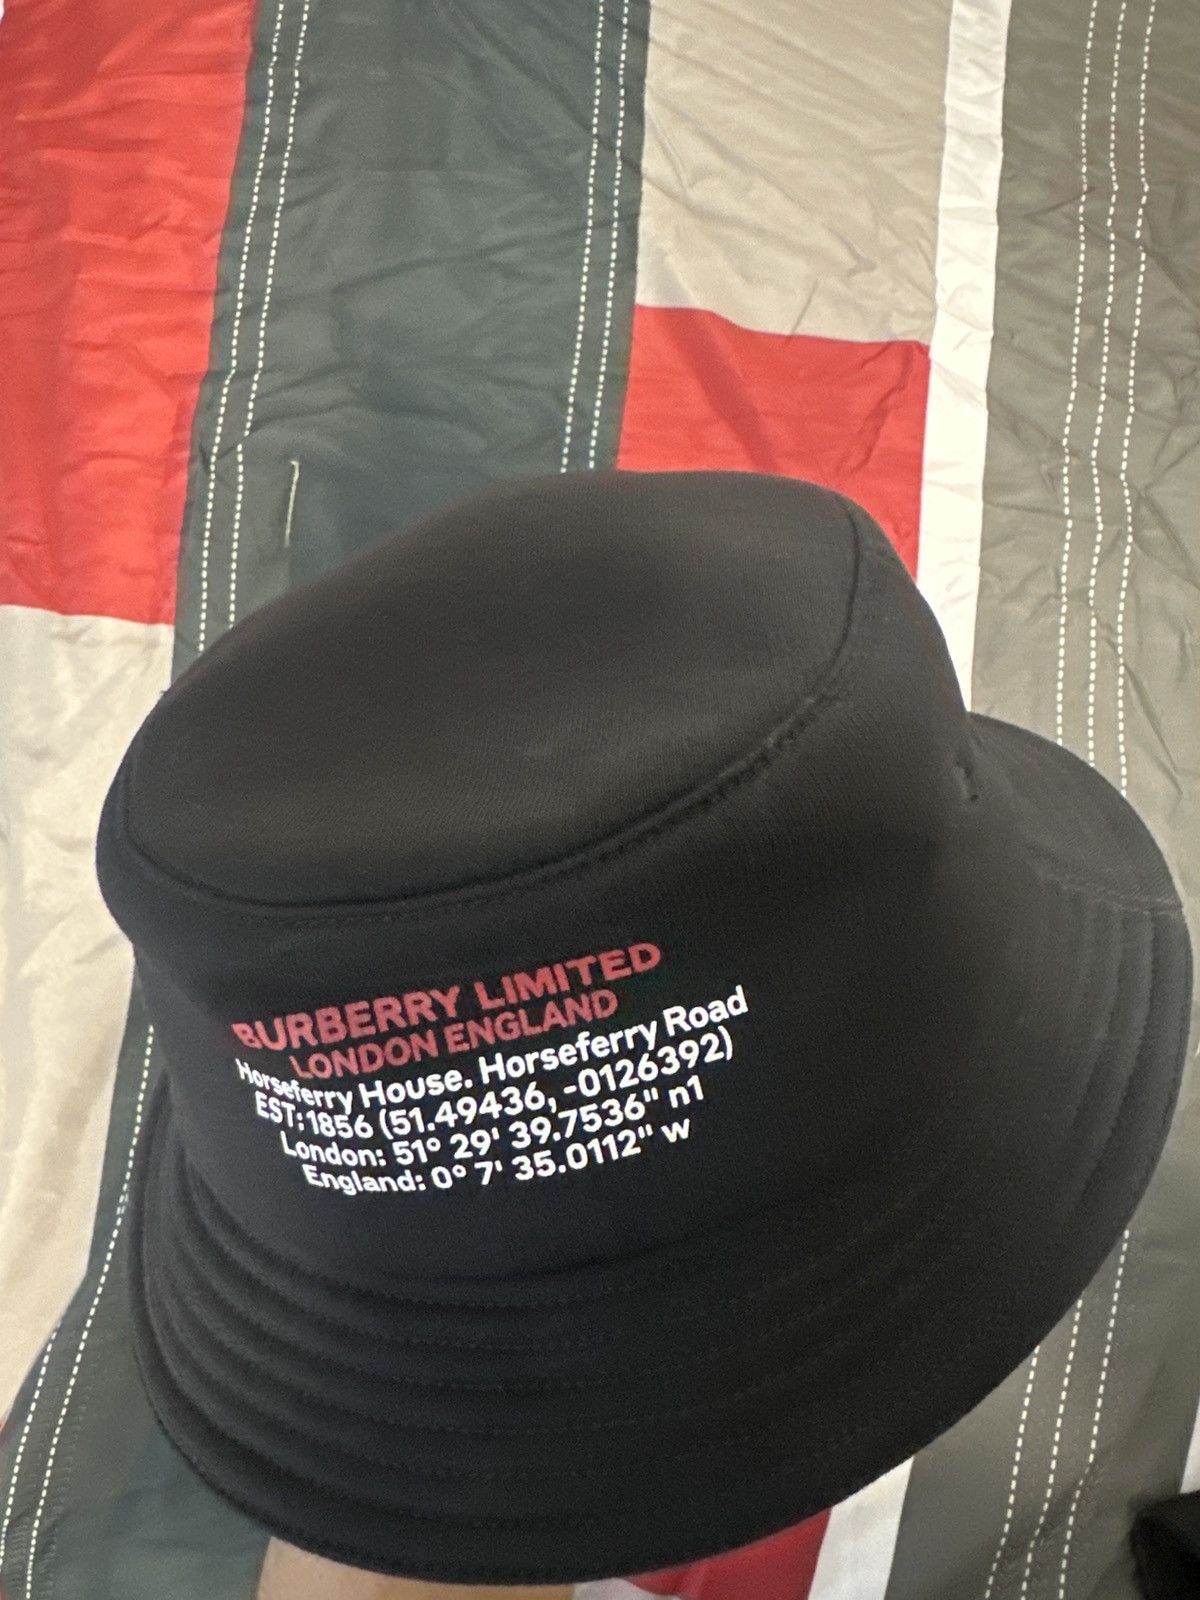 Burberry Limited edition bucket hat - 1